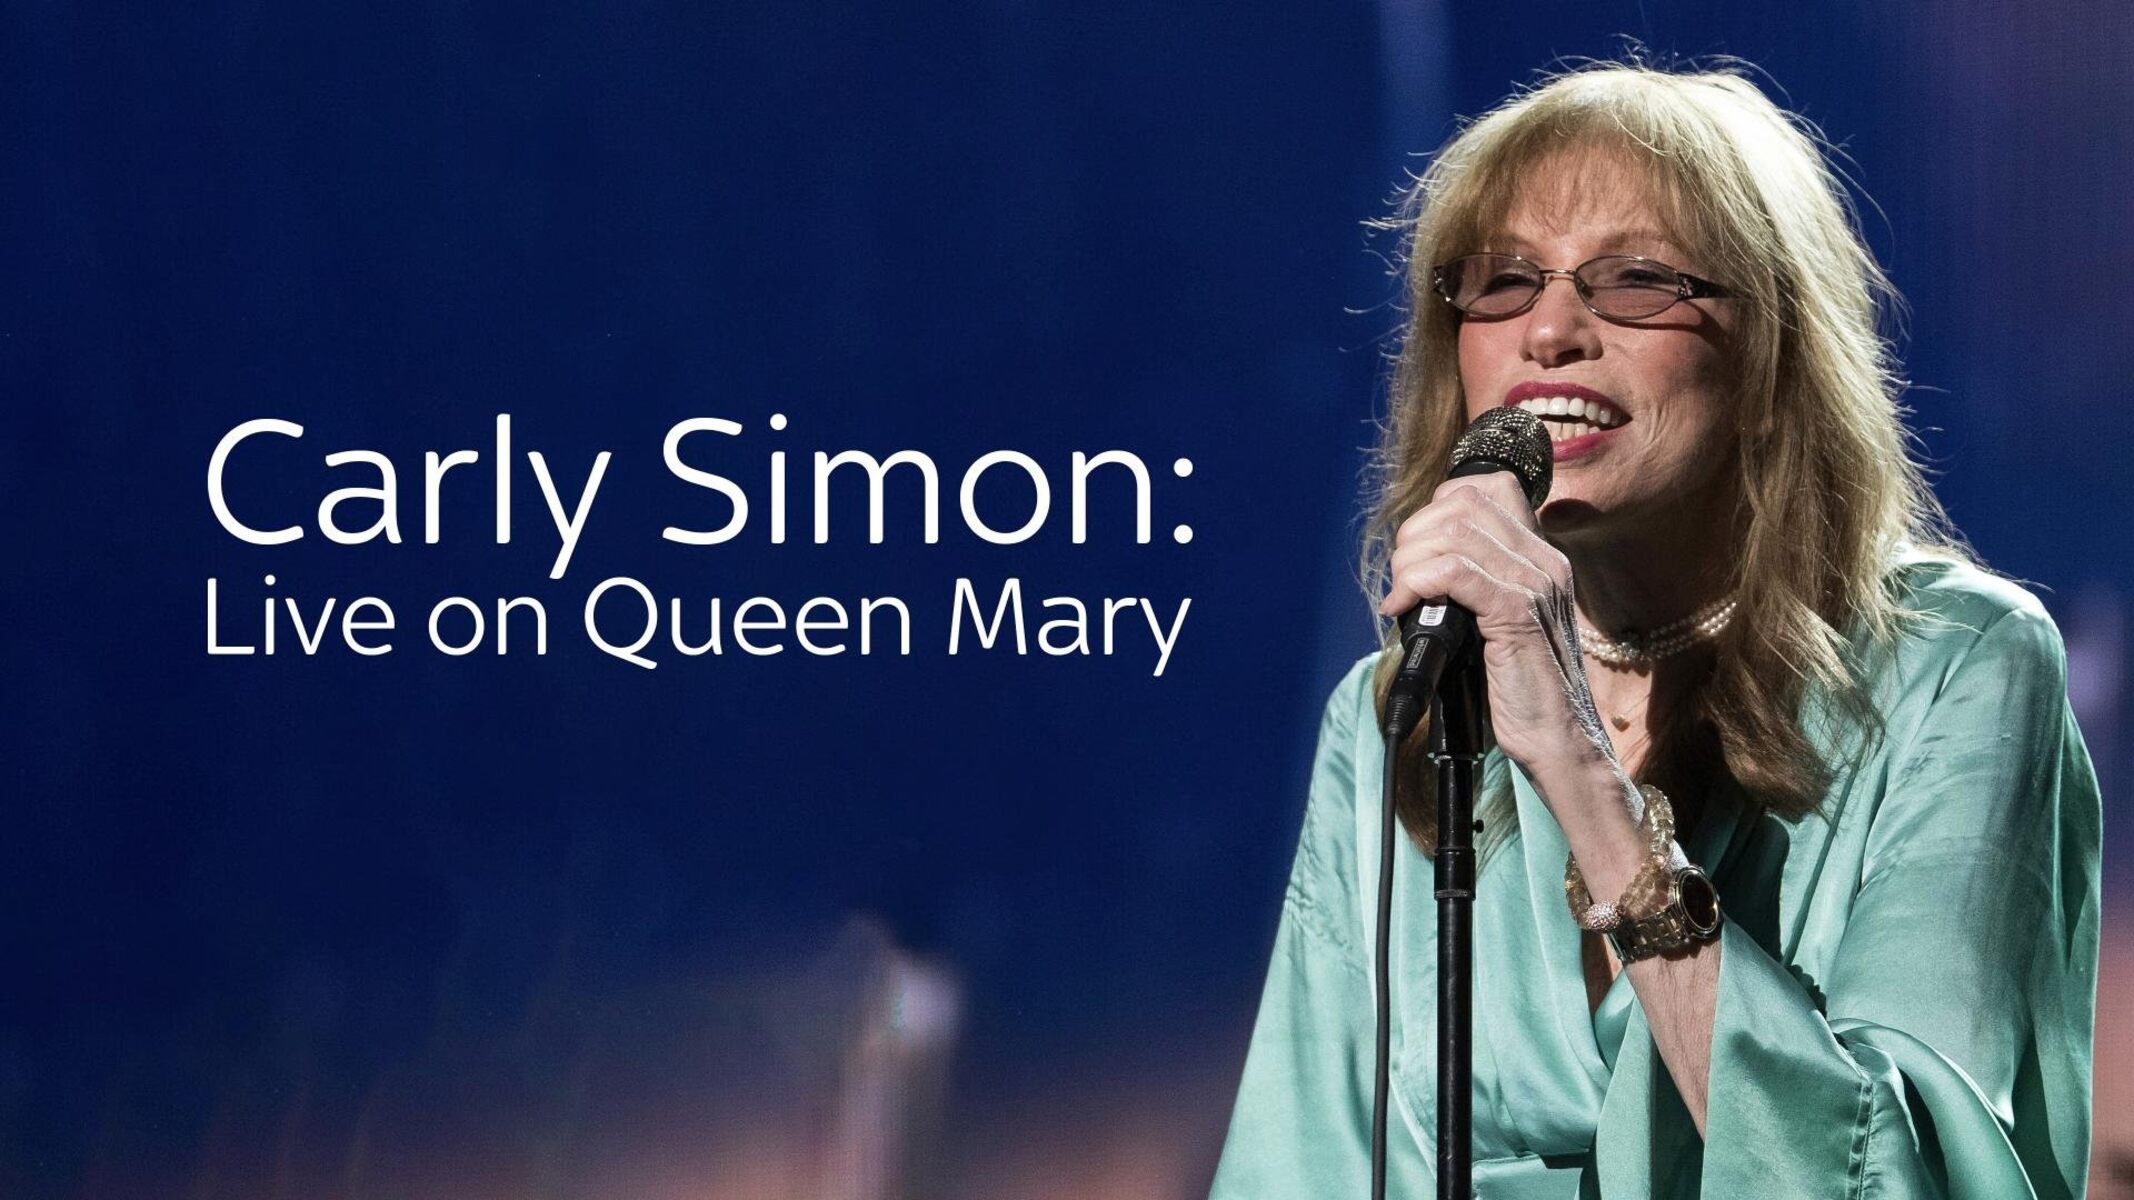 21-intriguing-facts-about-carly-simon